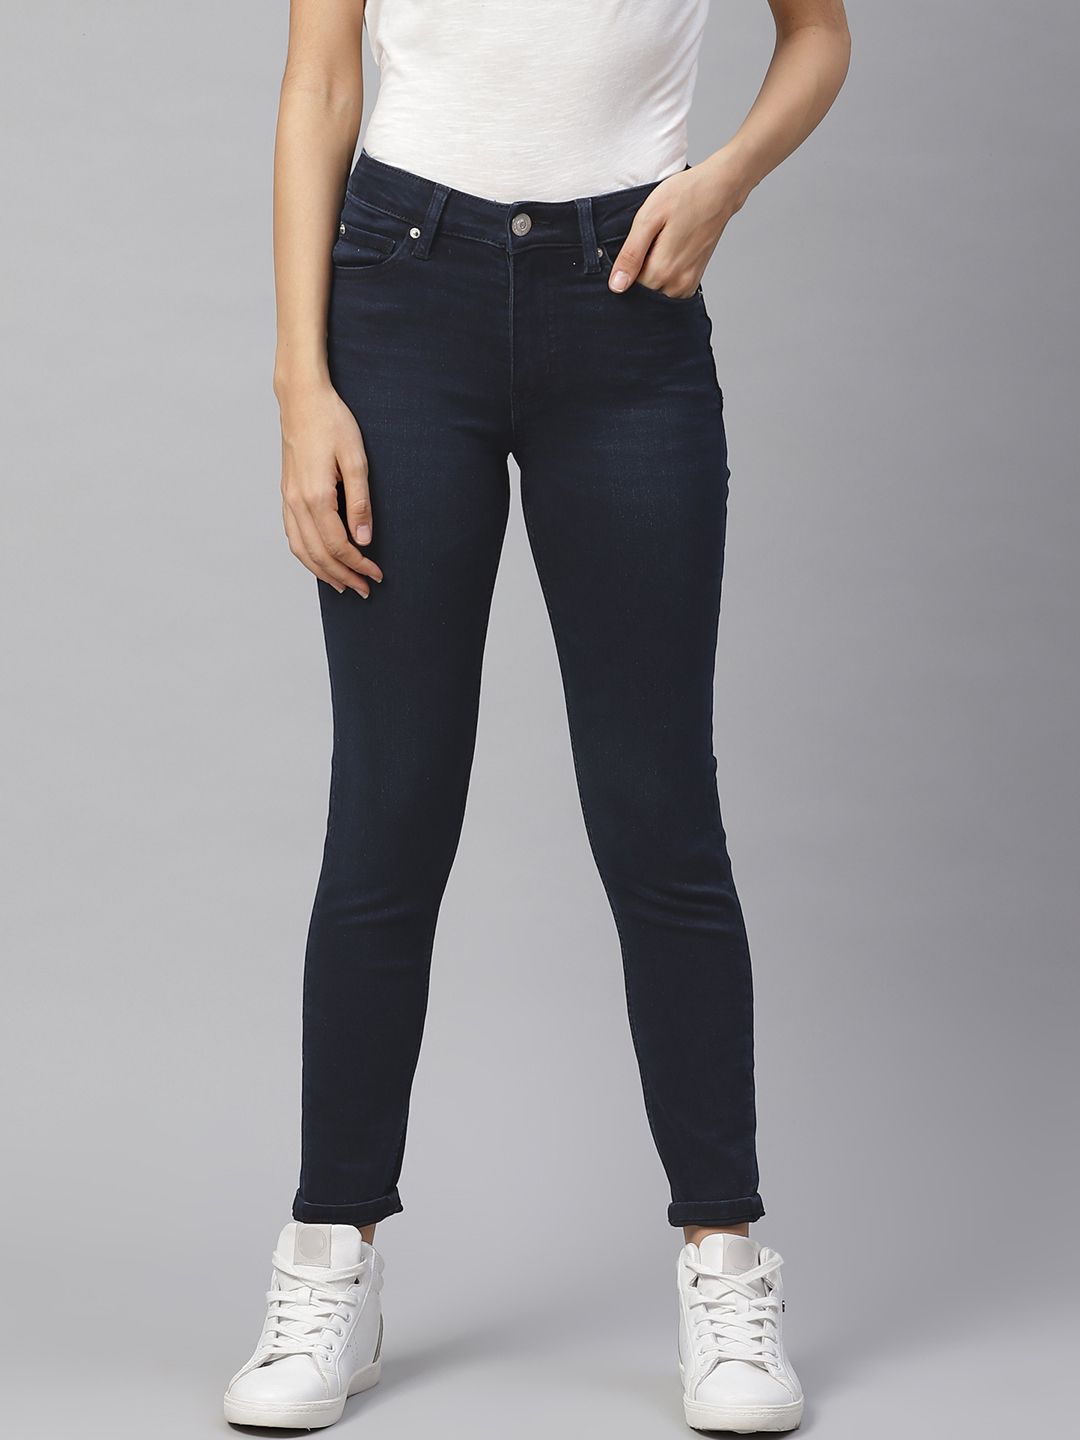 Marks & Spencer Women Navy Blue The Ivy Skinny Fit Mid-Rise Clean Look Stretchable Jeans Price in India